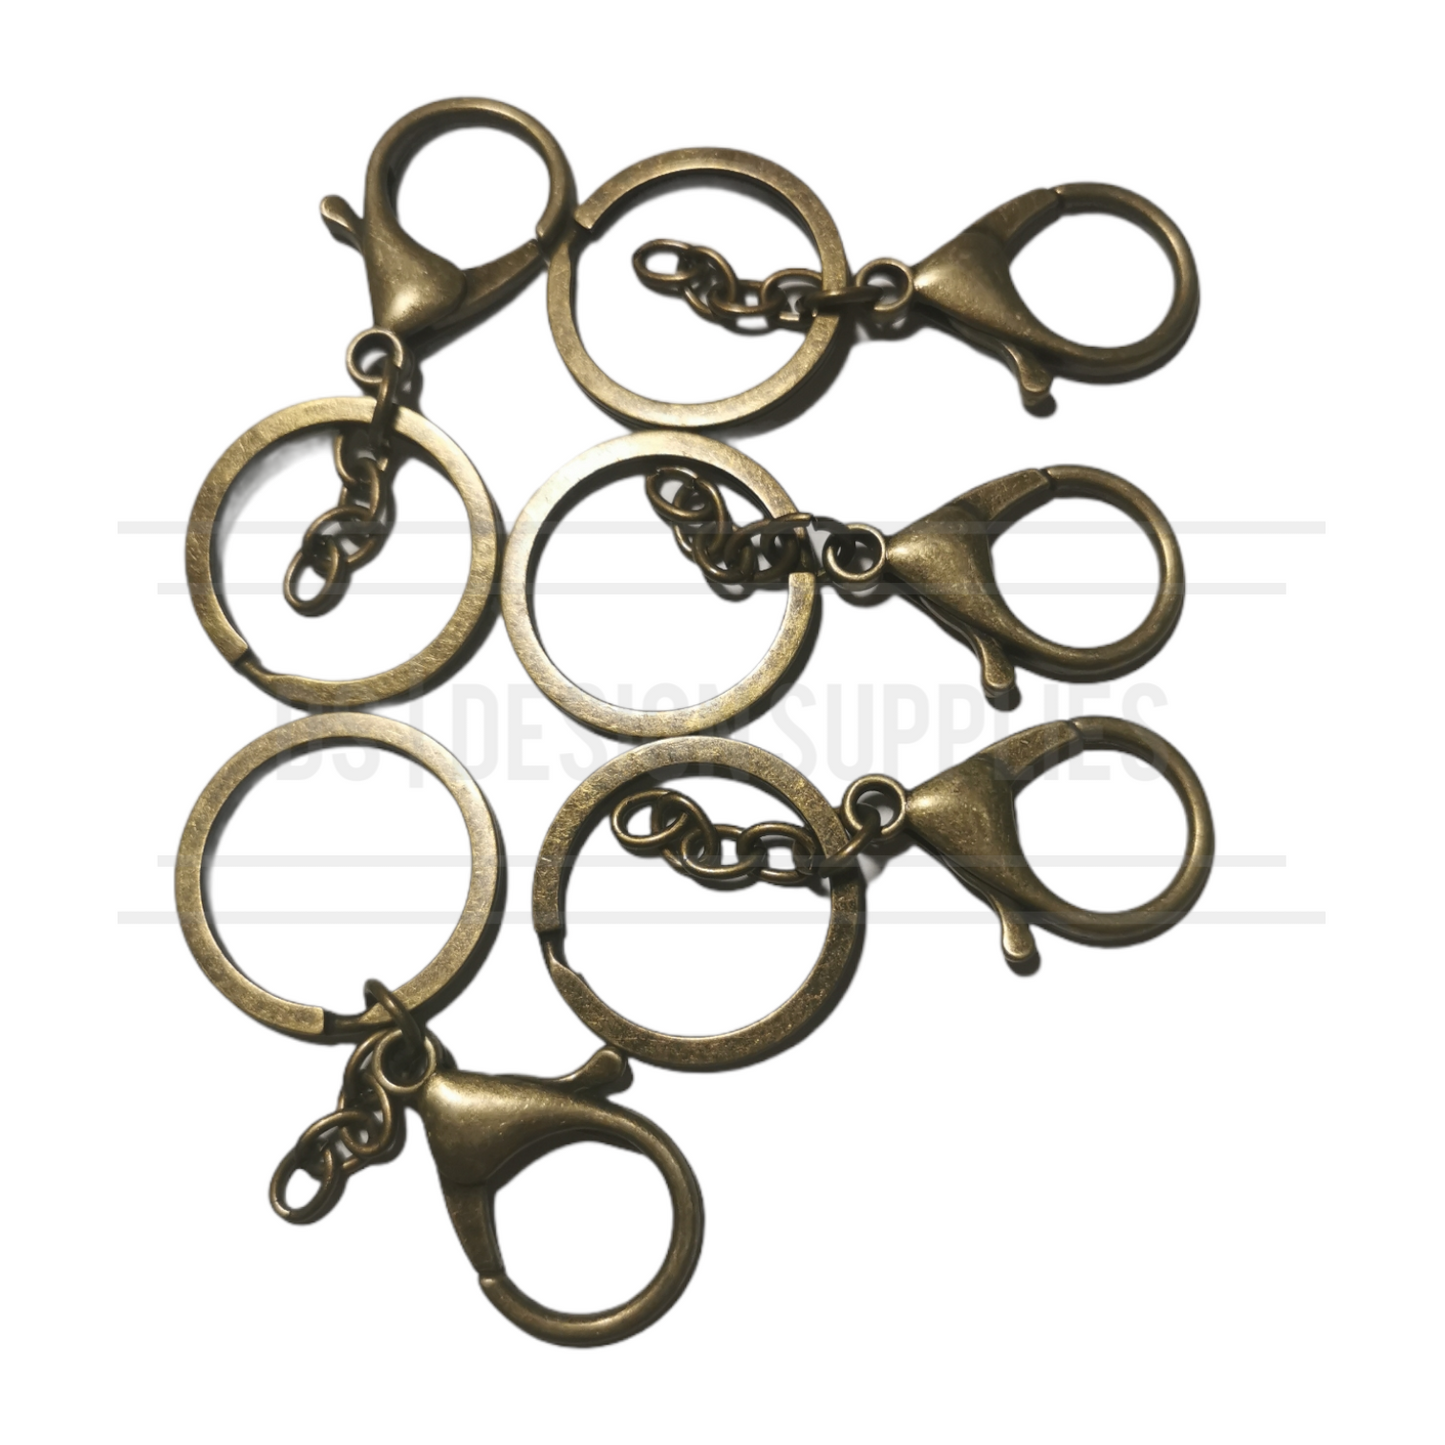 5 Key Ring with Clip - Antique Bronze